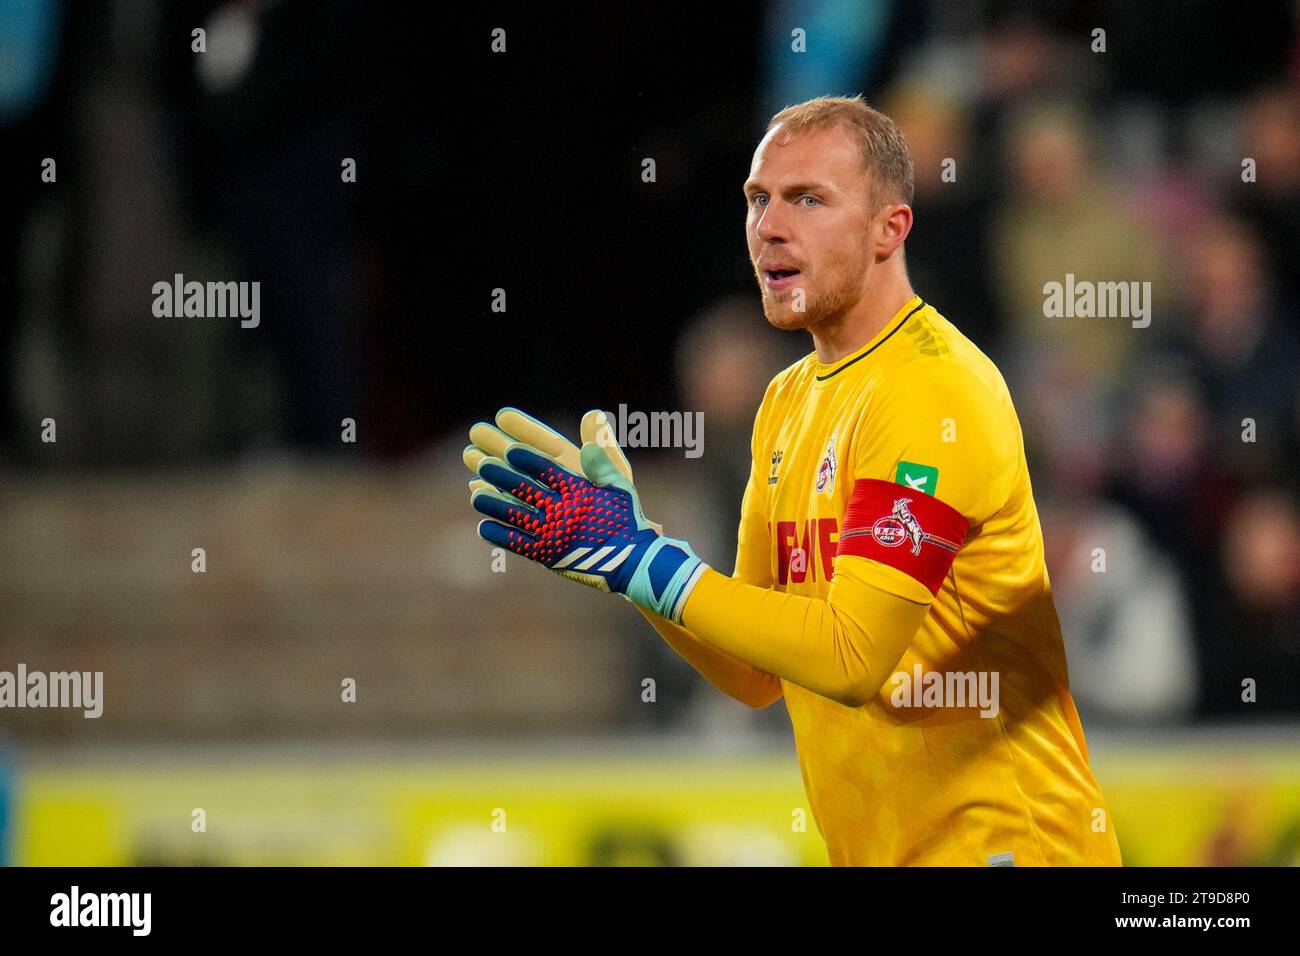 Cologne, Germany. 24th Nov, 2023. COLOGNE, GERMANY - NOVEMBER 24: Goalkeeper Marvin Schwabe of 1. FC Koln applauds during the Bundesliga match between 1. FC Koln and FC Bayern Munchen at the RheinEnergieStadion on November 24, 2023 in Cologne, Germany. (Photo by Rene Nijhuis/BSR Agency) Credit: BSR Agency/Alamy Live News Stock Photo